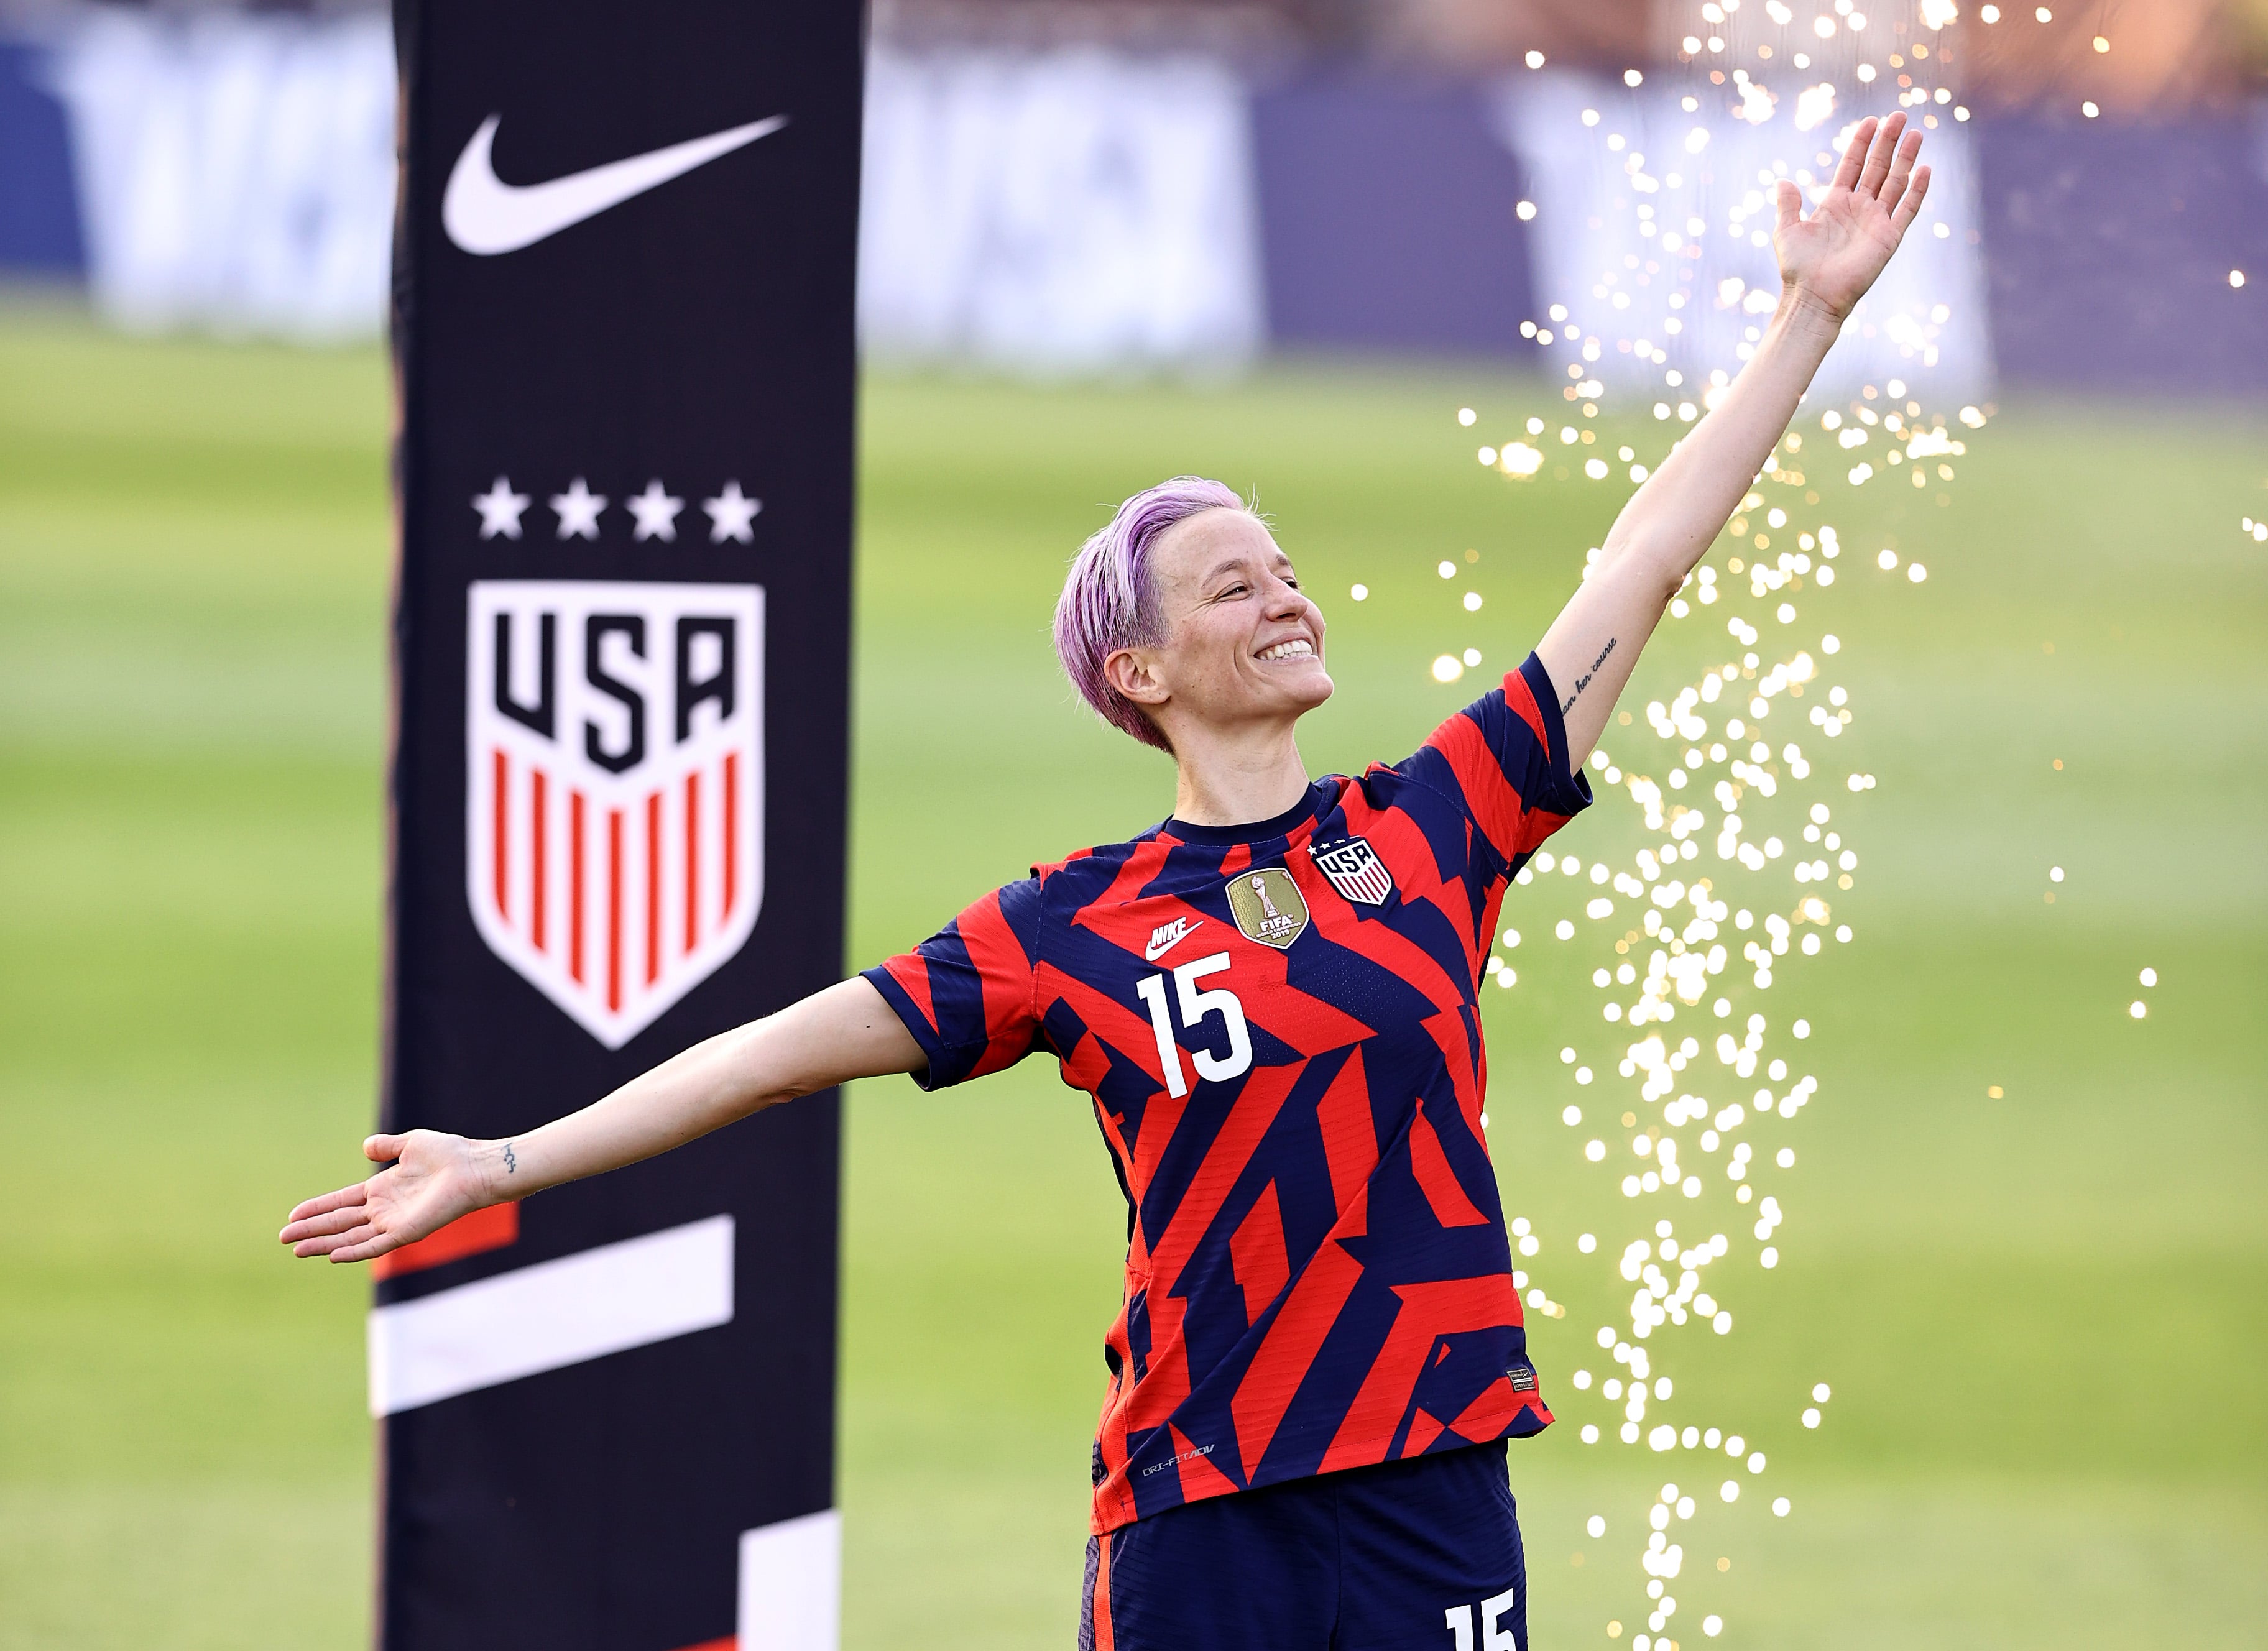 mrapinoe is now the #14 player in @uswnt history to reach